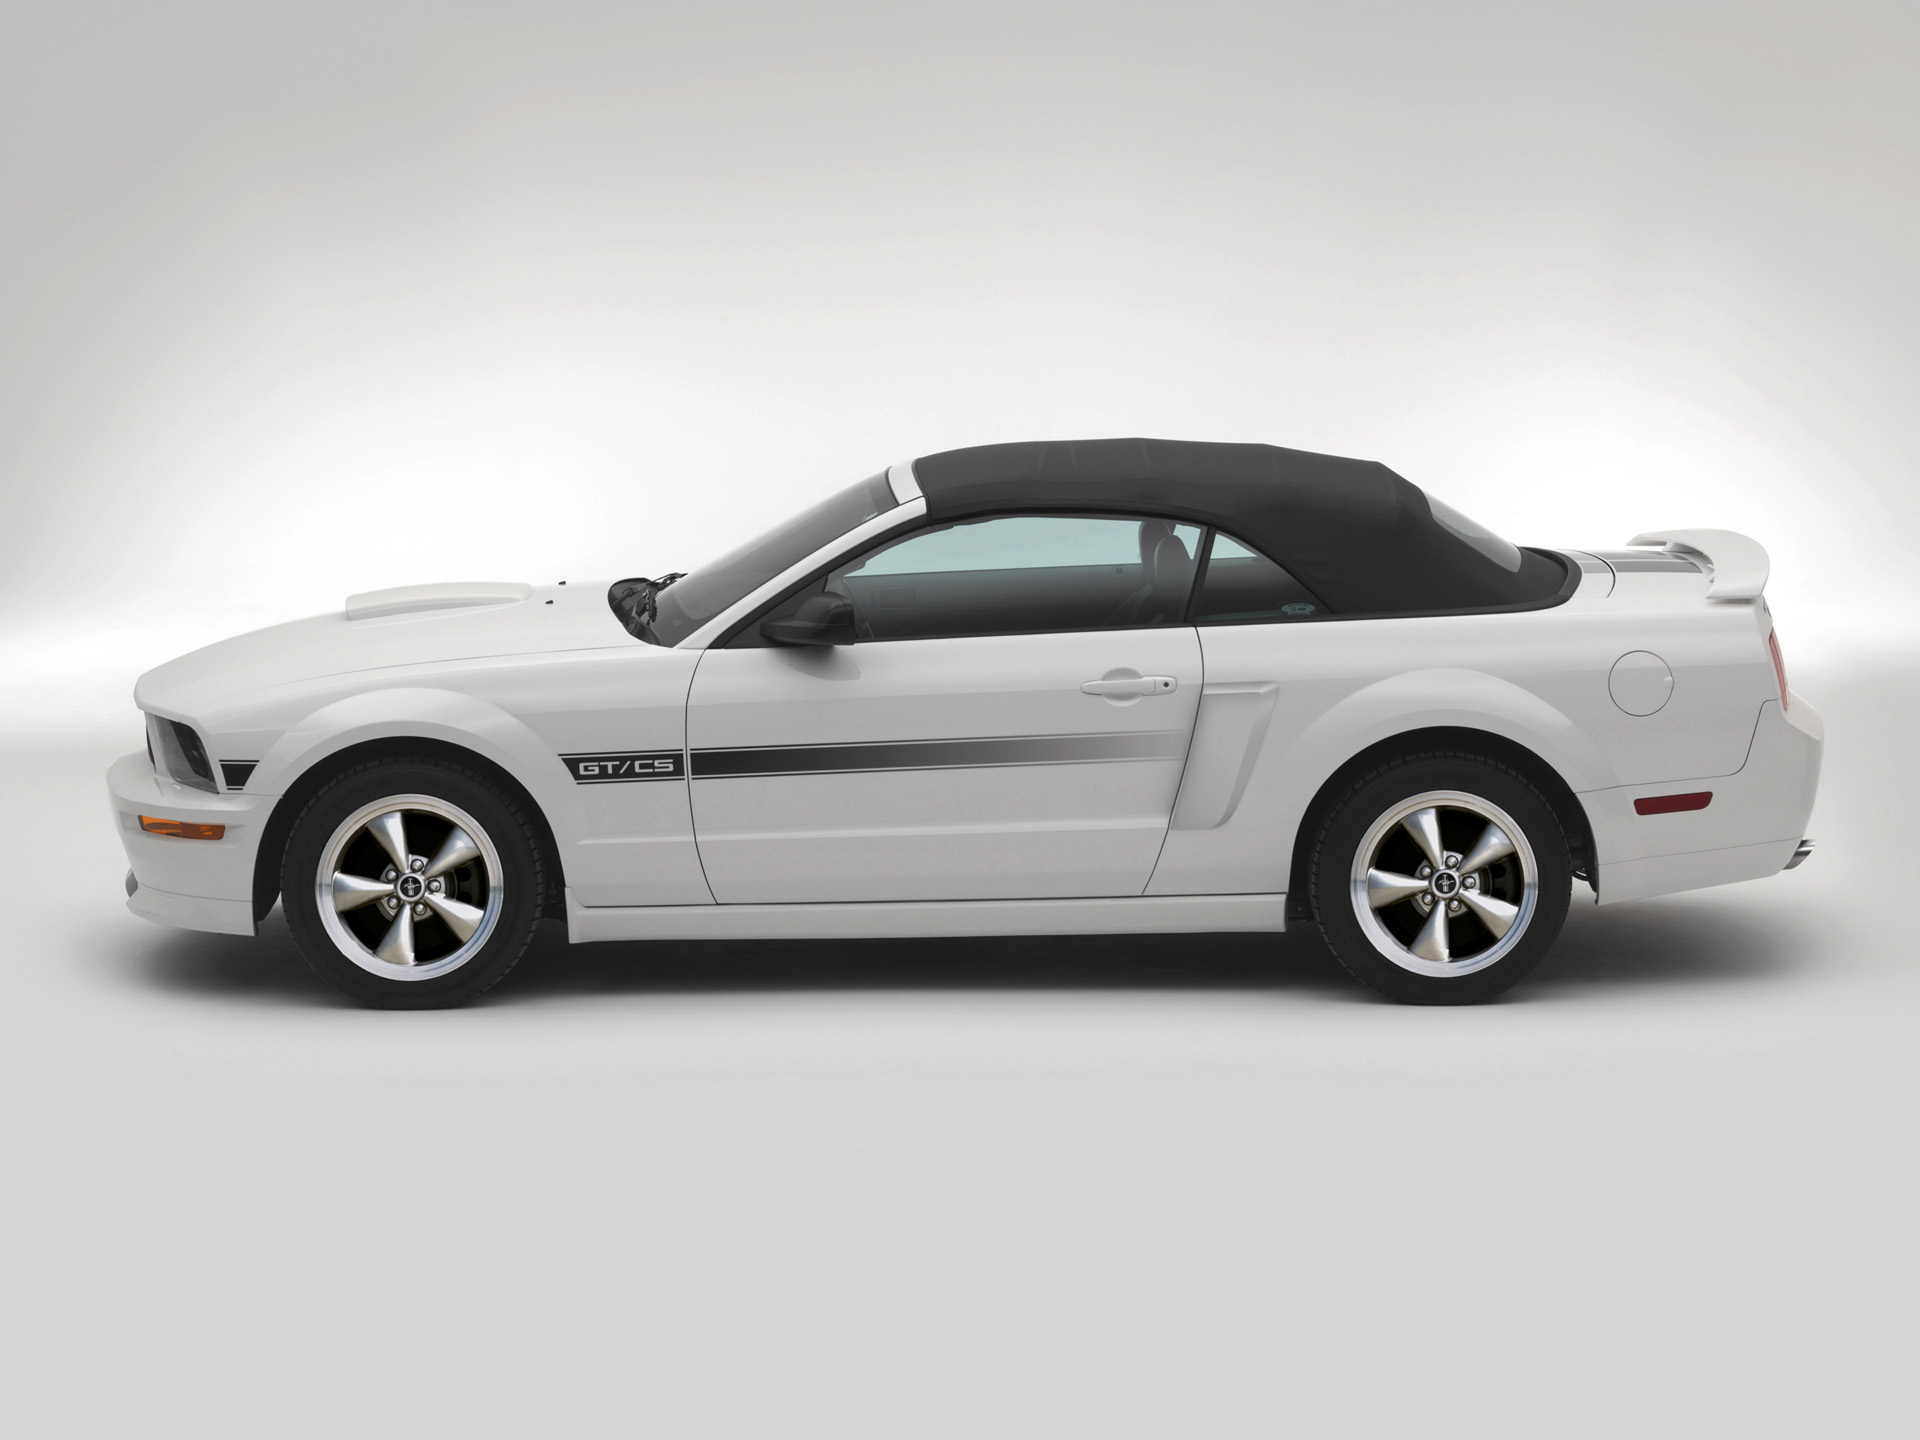 2007 Ford Mustang White And Black Convertible 1920x1440 Wallpaper Teahub Io